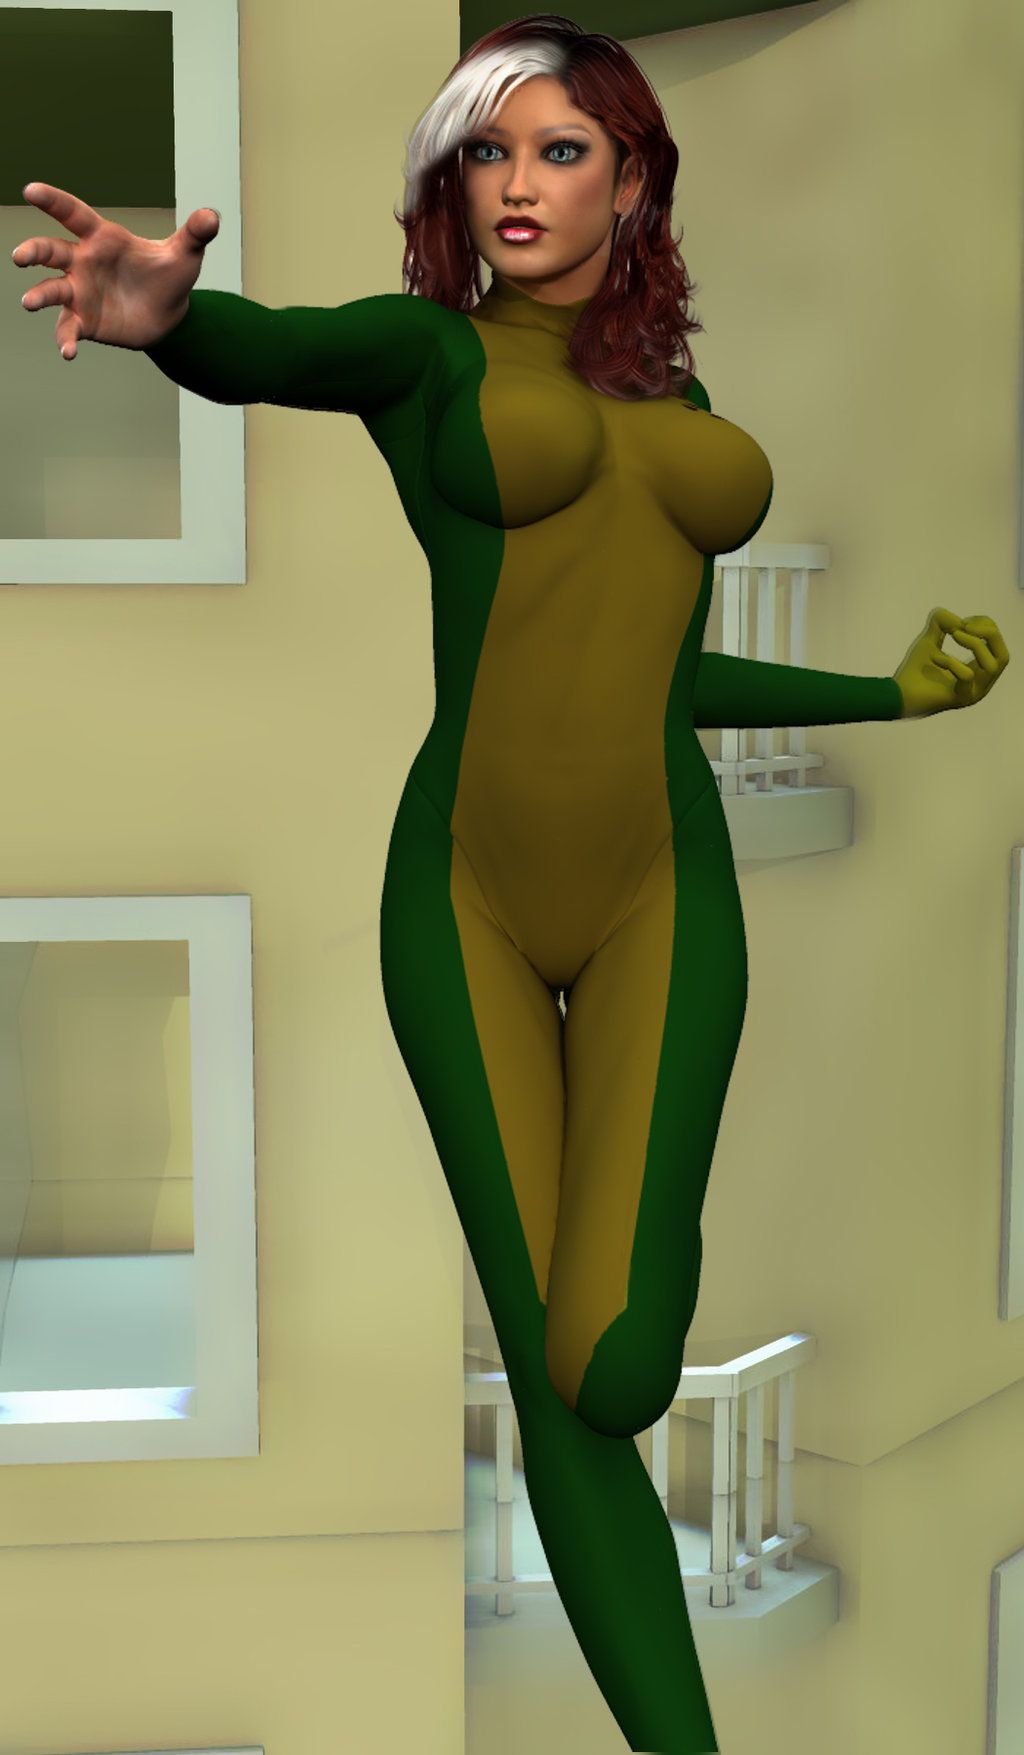 Cgi Hentai Rogue Porn Pictures Superheroes Pictures